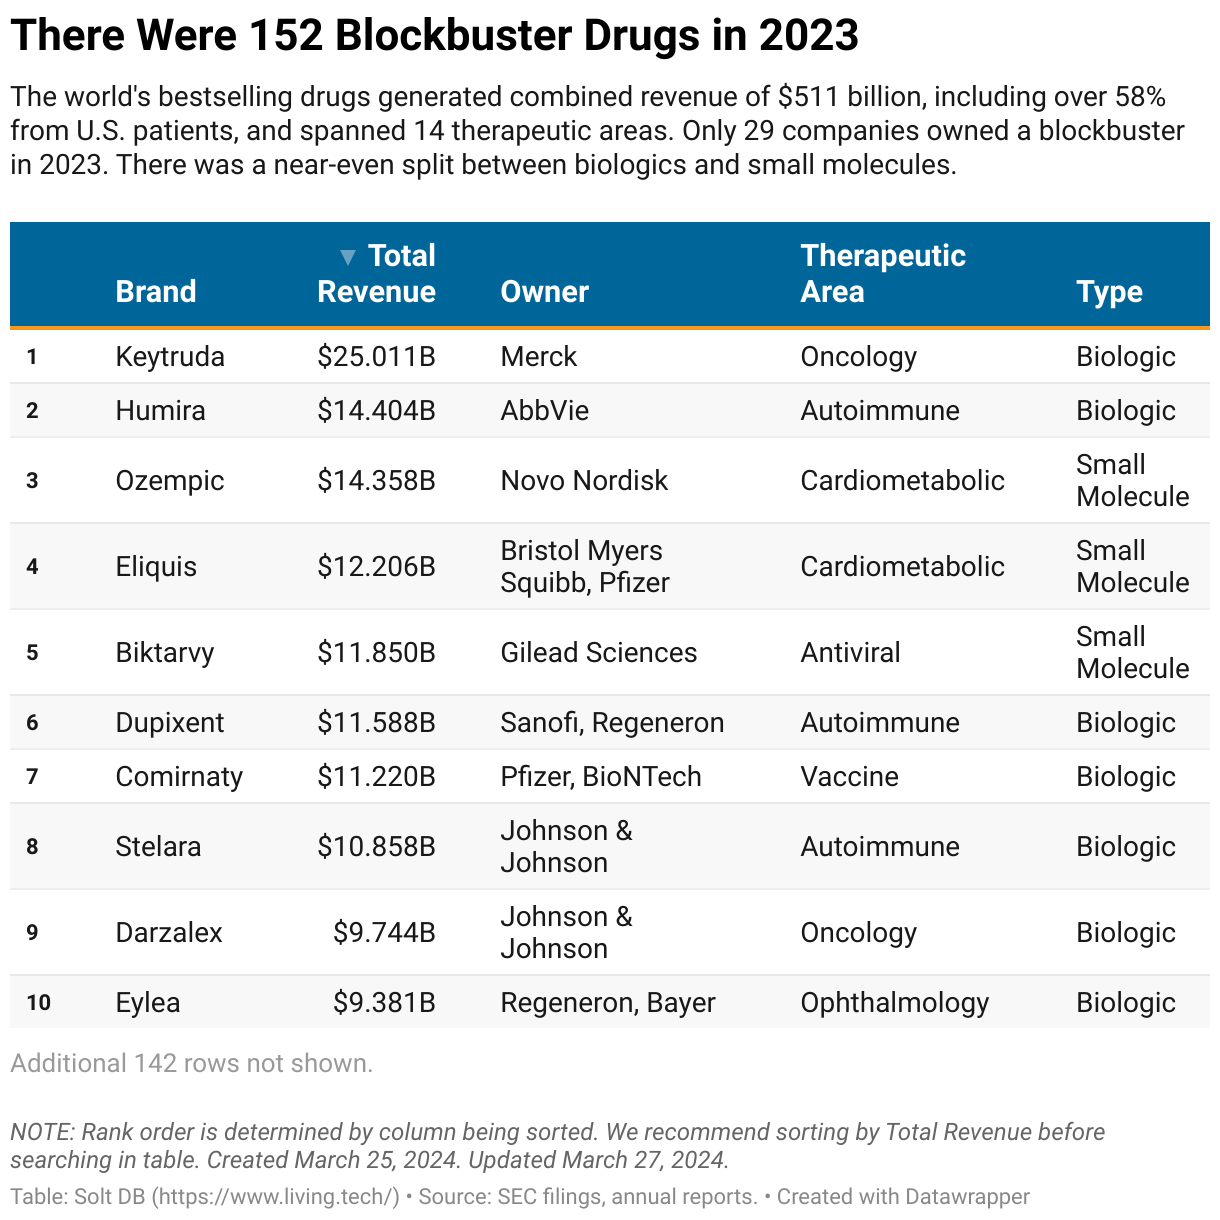 A table showing all 152 blockbuster drugs from 2023.